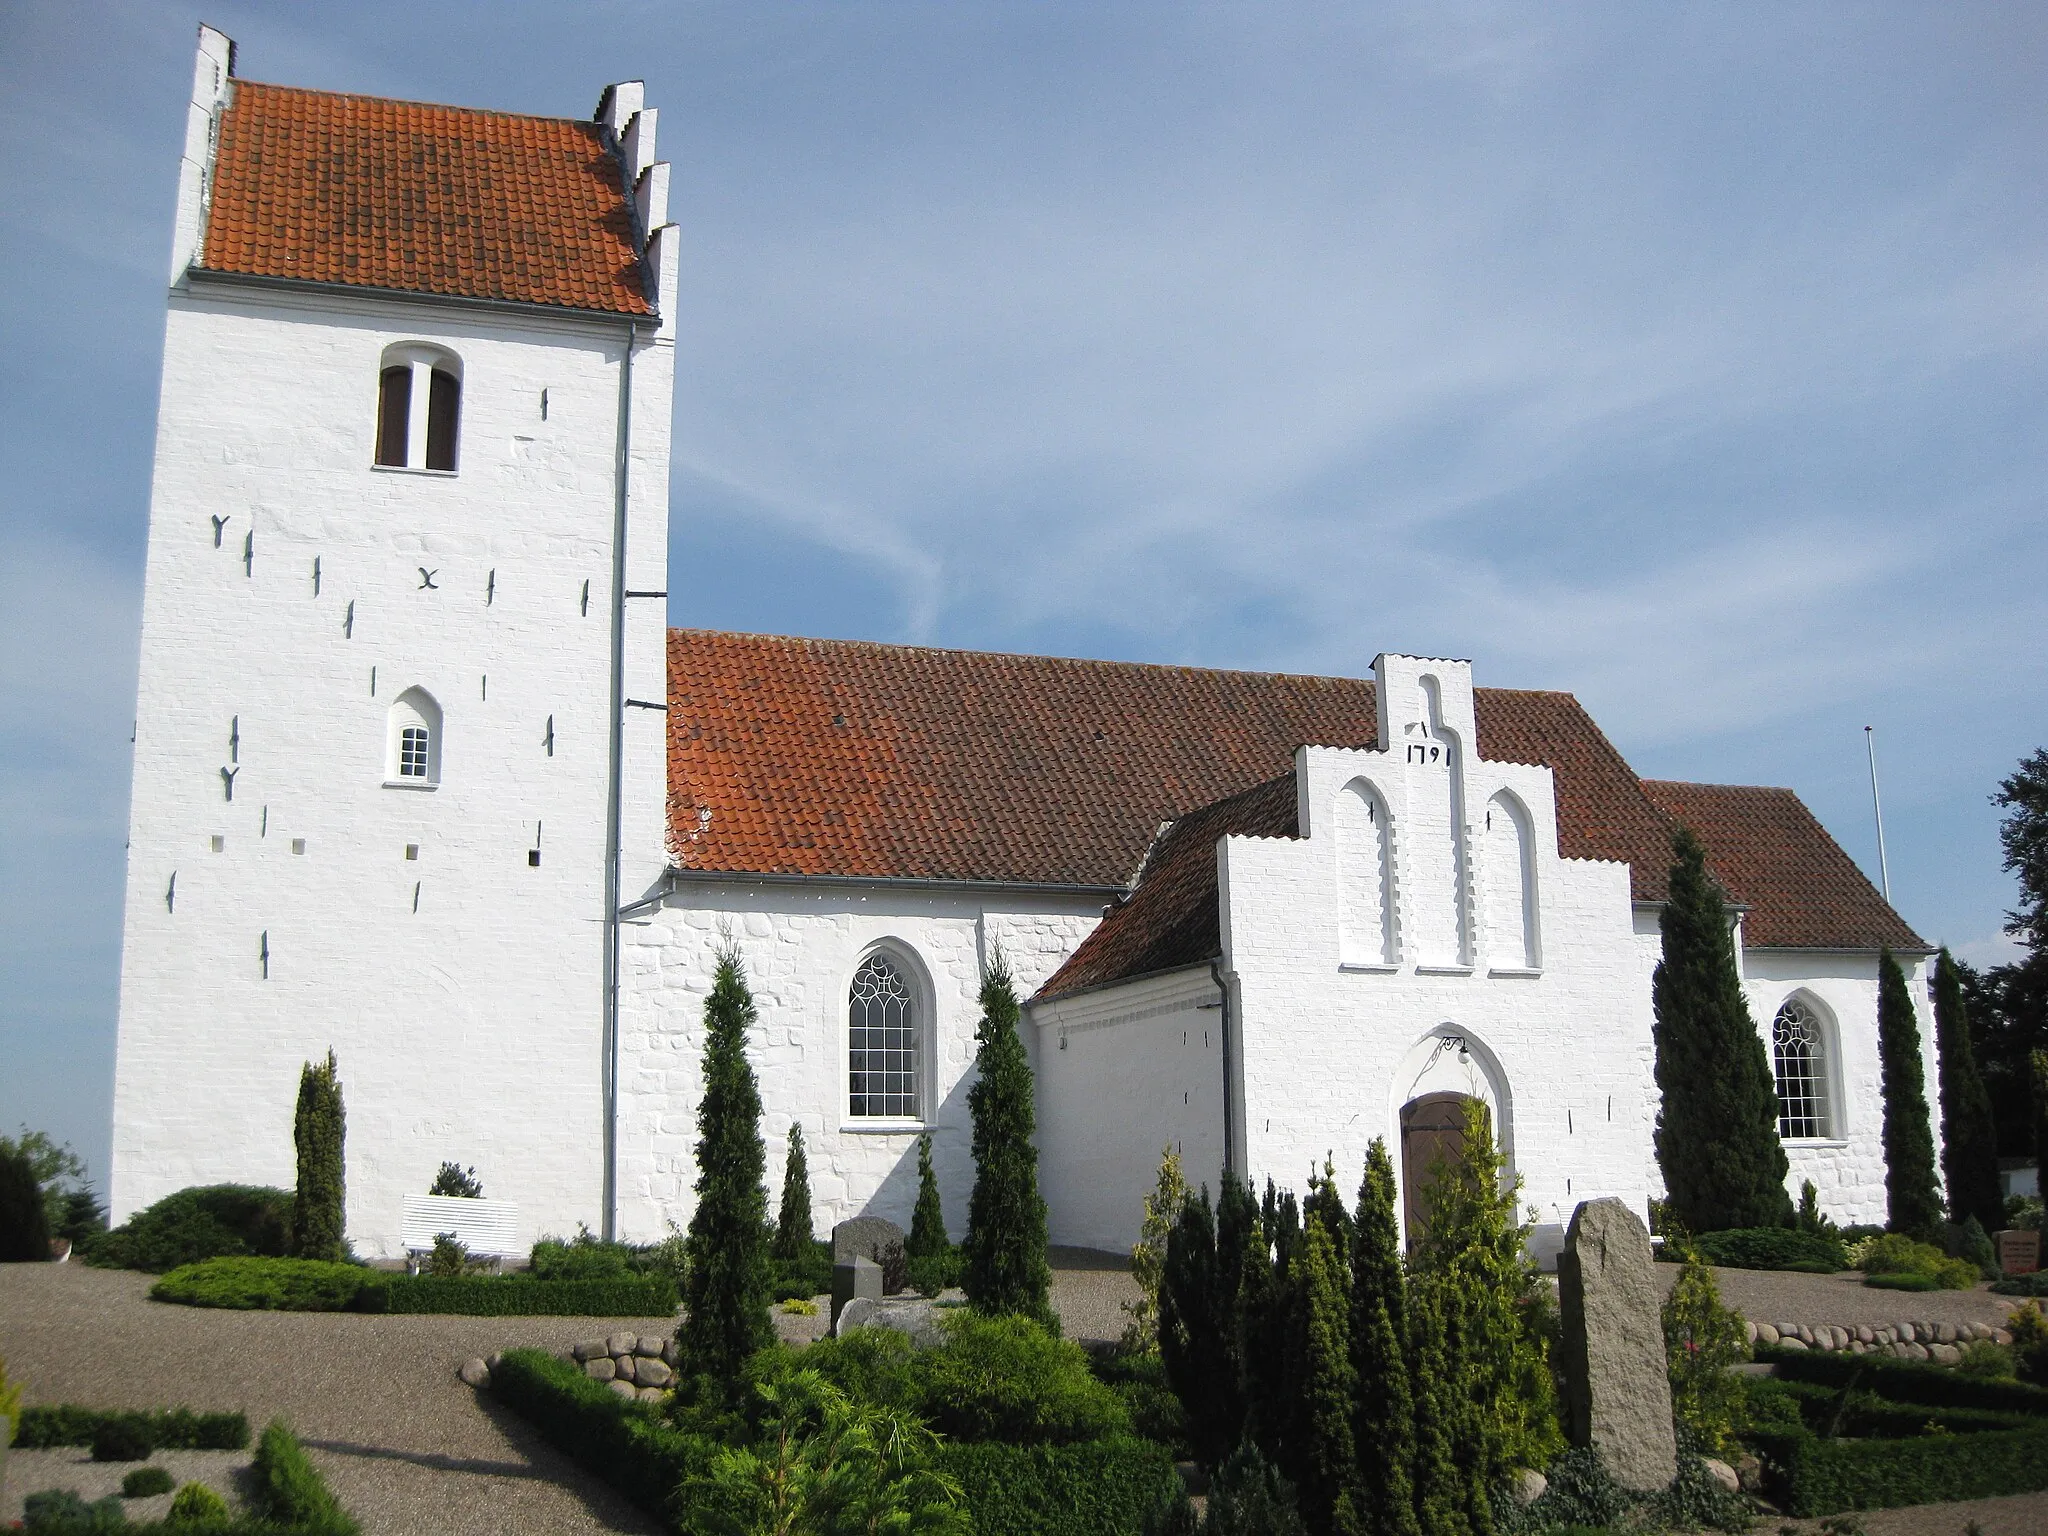 Photo showing: The church "Udby Kirke" in the village "Udby", Vordingborg Municipality. The village is located on South Zealand in east Denmark.